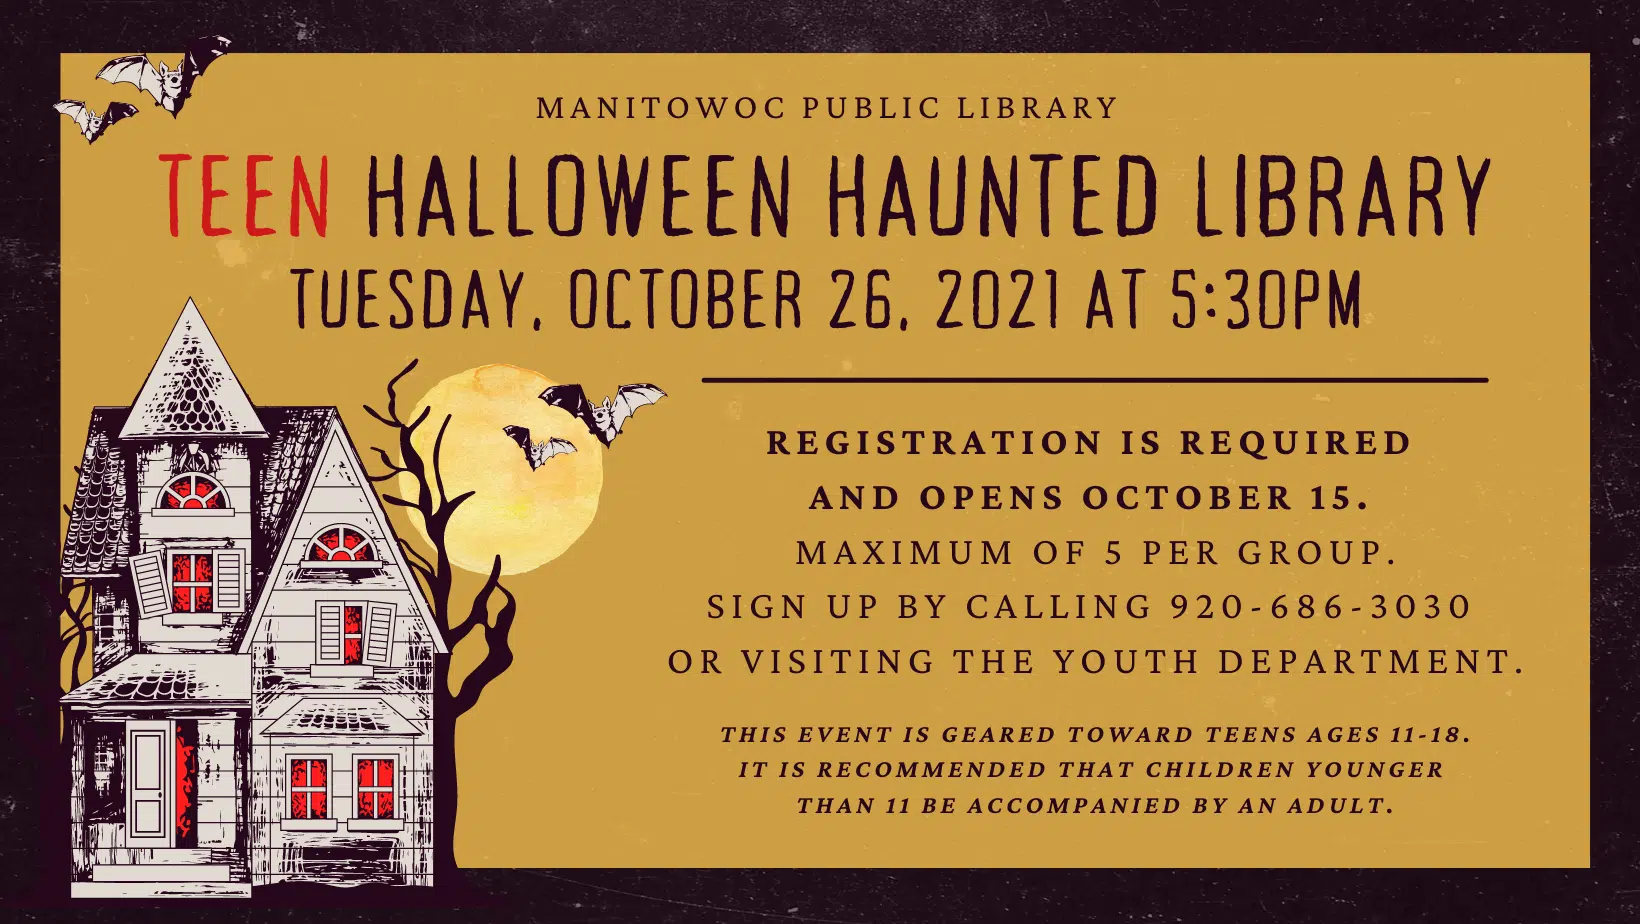 Manitowoc Public Library to Host Teen Haunted Library